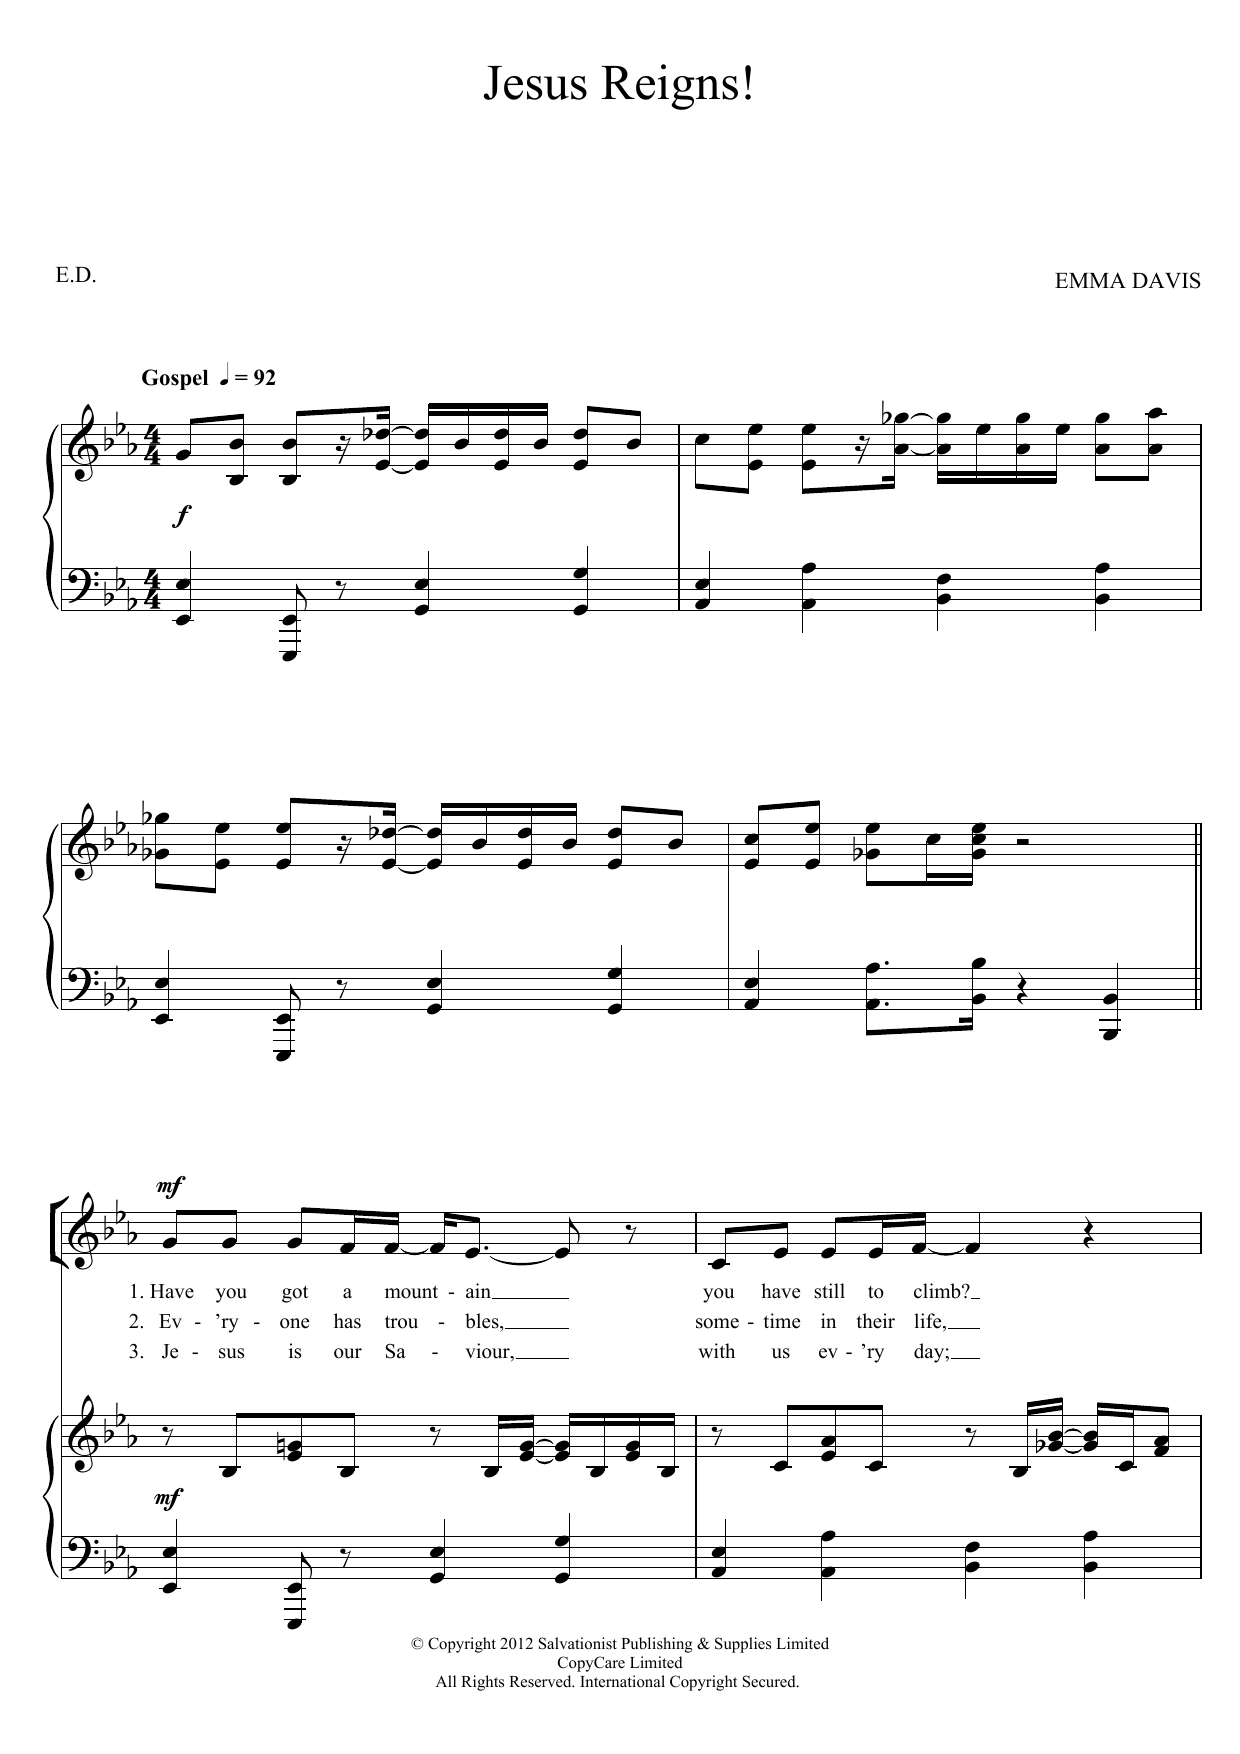 Download The Salvation Army Jesus Reigns! Sheet Music